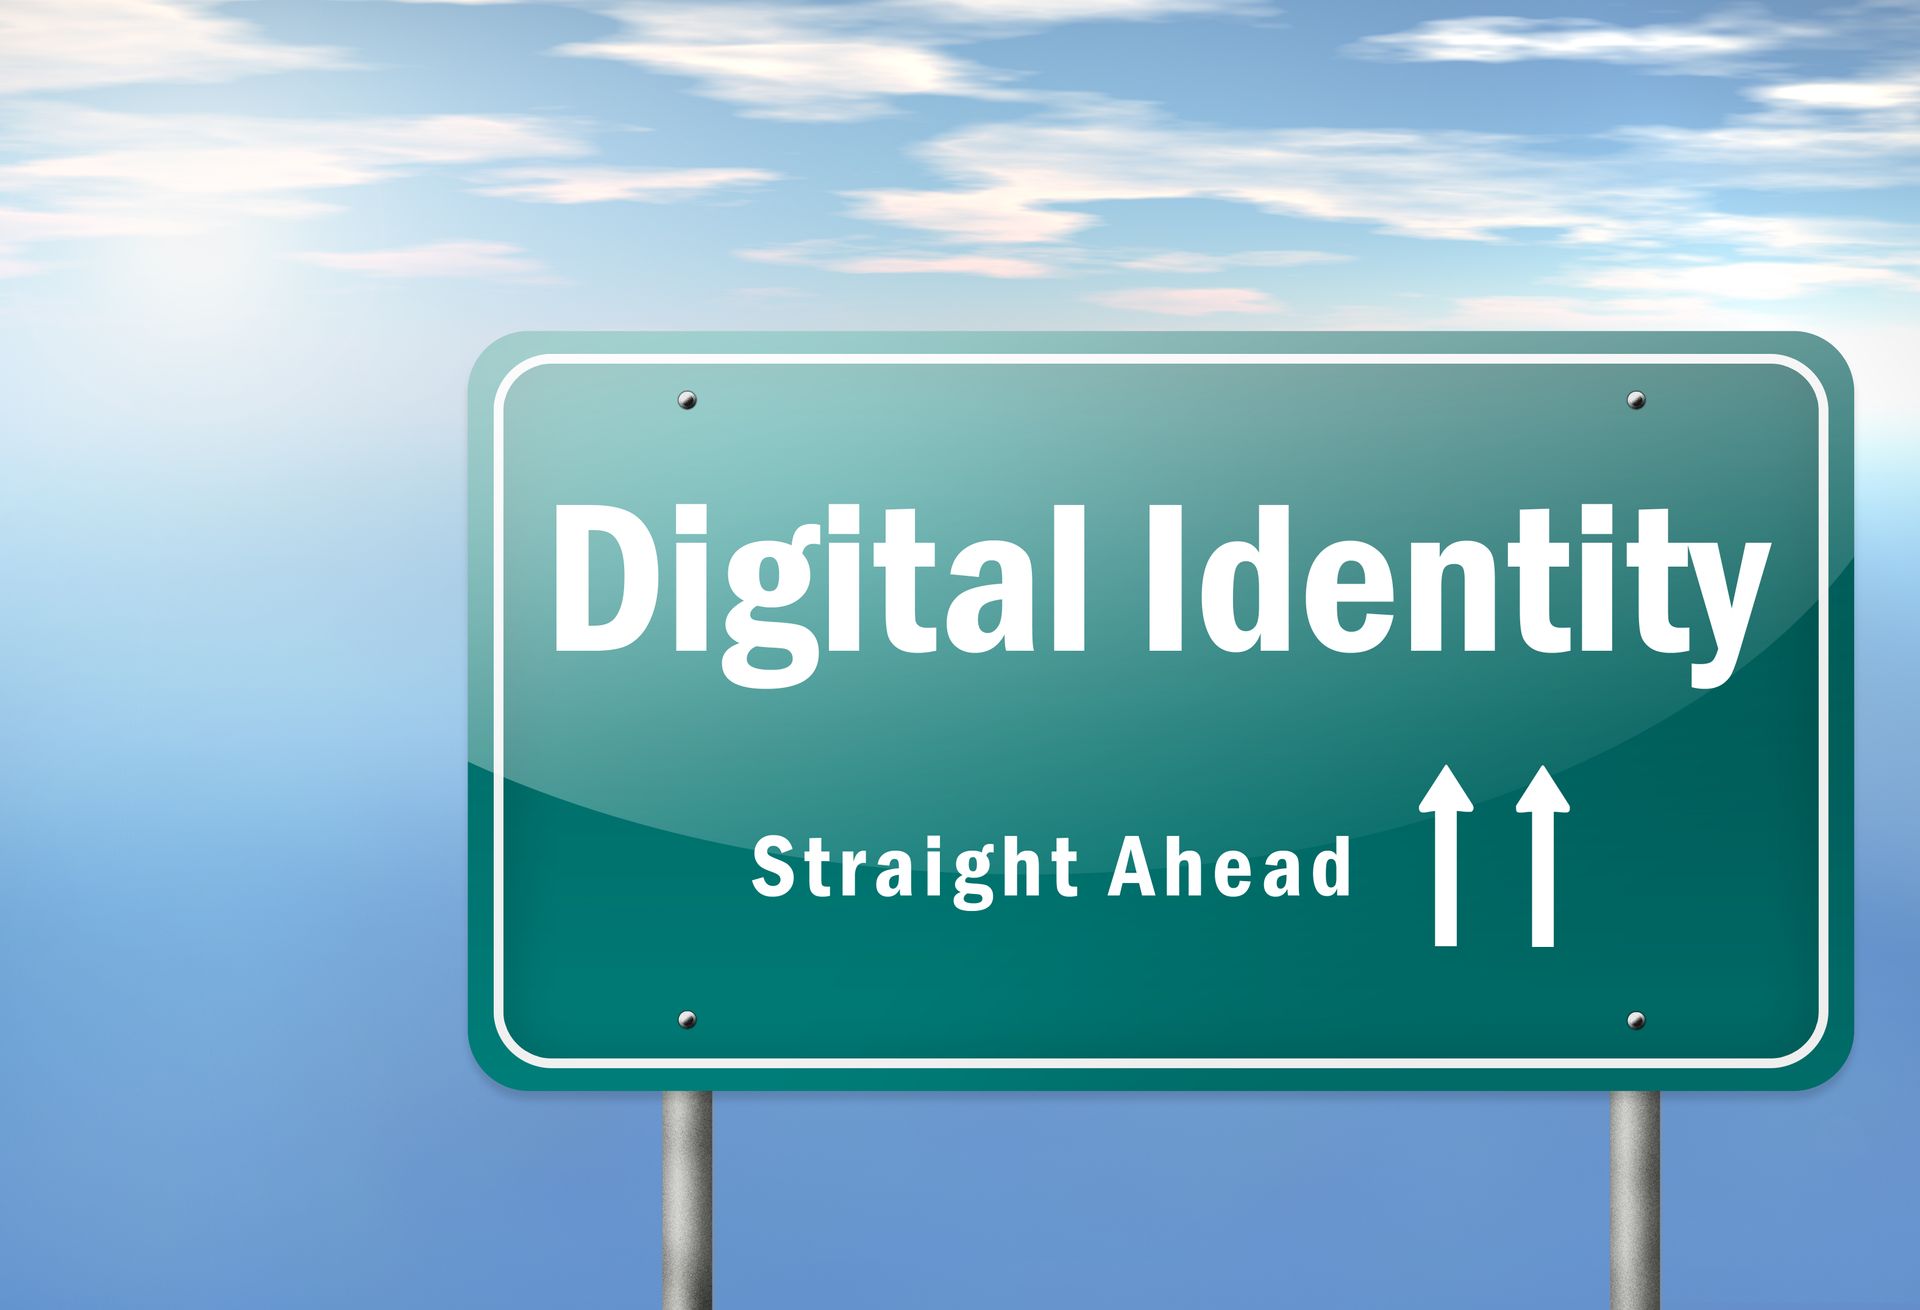 Digital Identity sign showing straight ahead direction